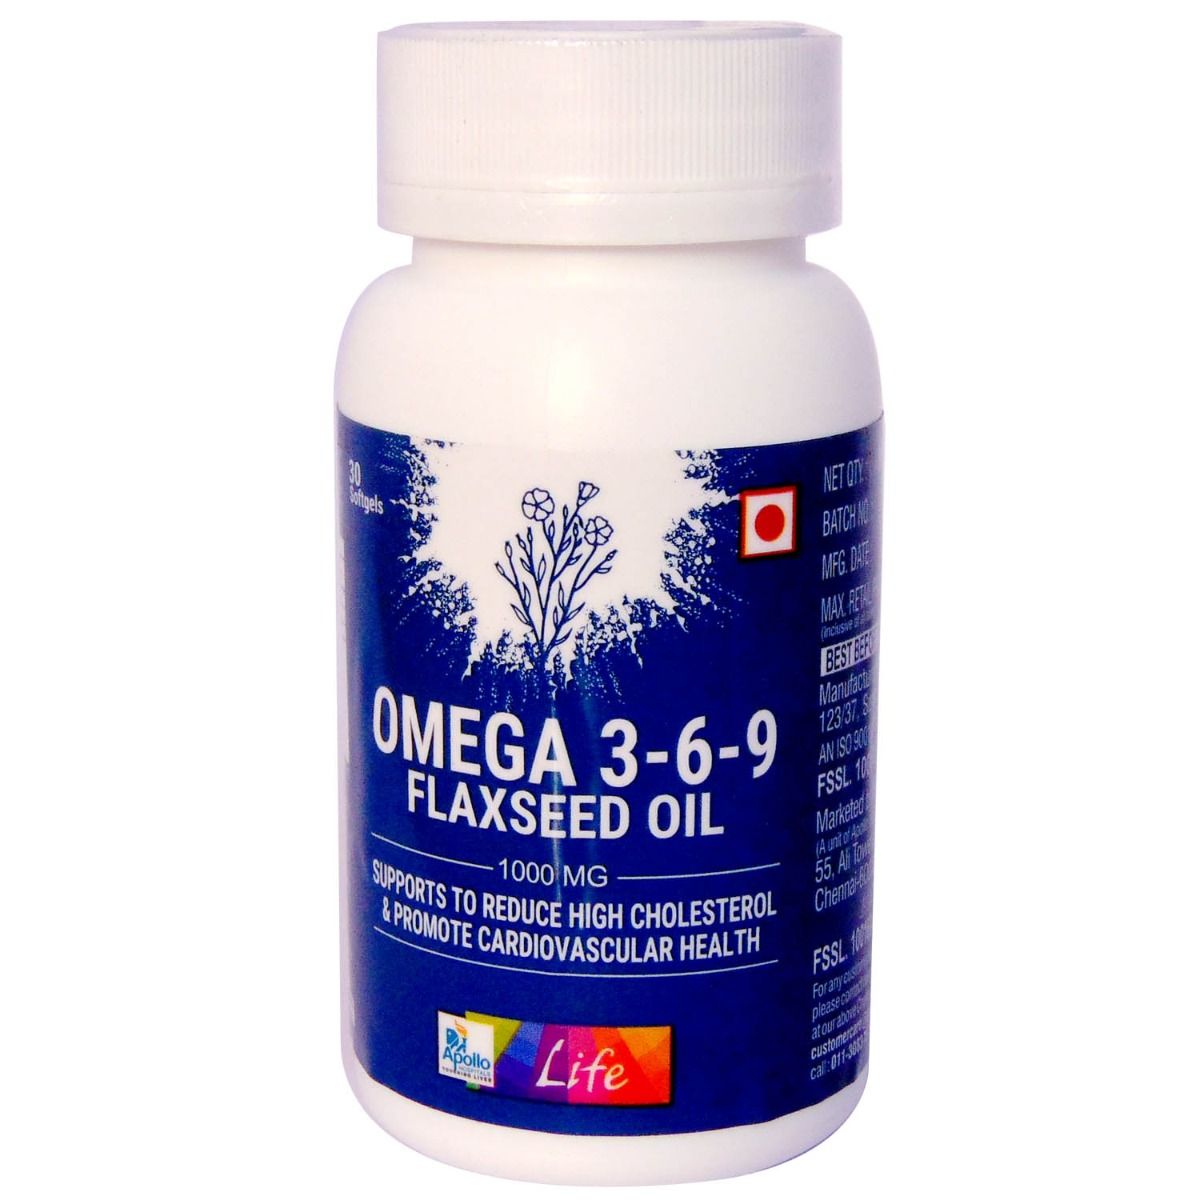 Buy Apollo Life Omega 3-6-9 Flaxseed Oil 1000 mg, 30 Capsules Online